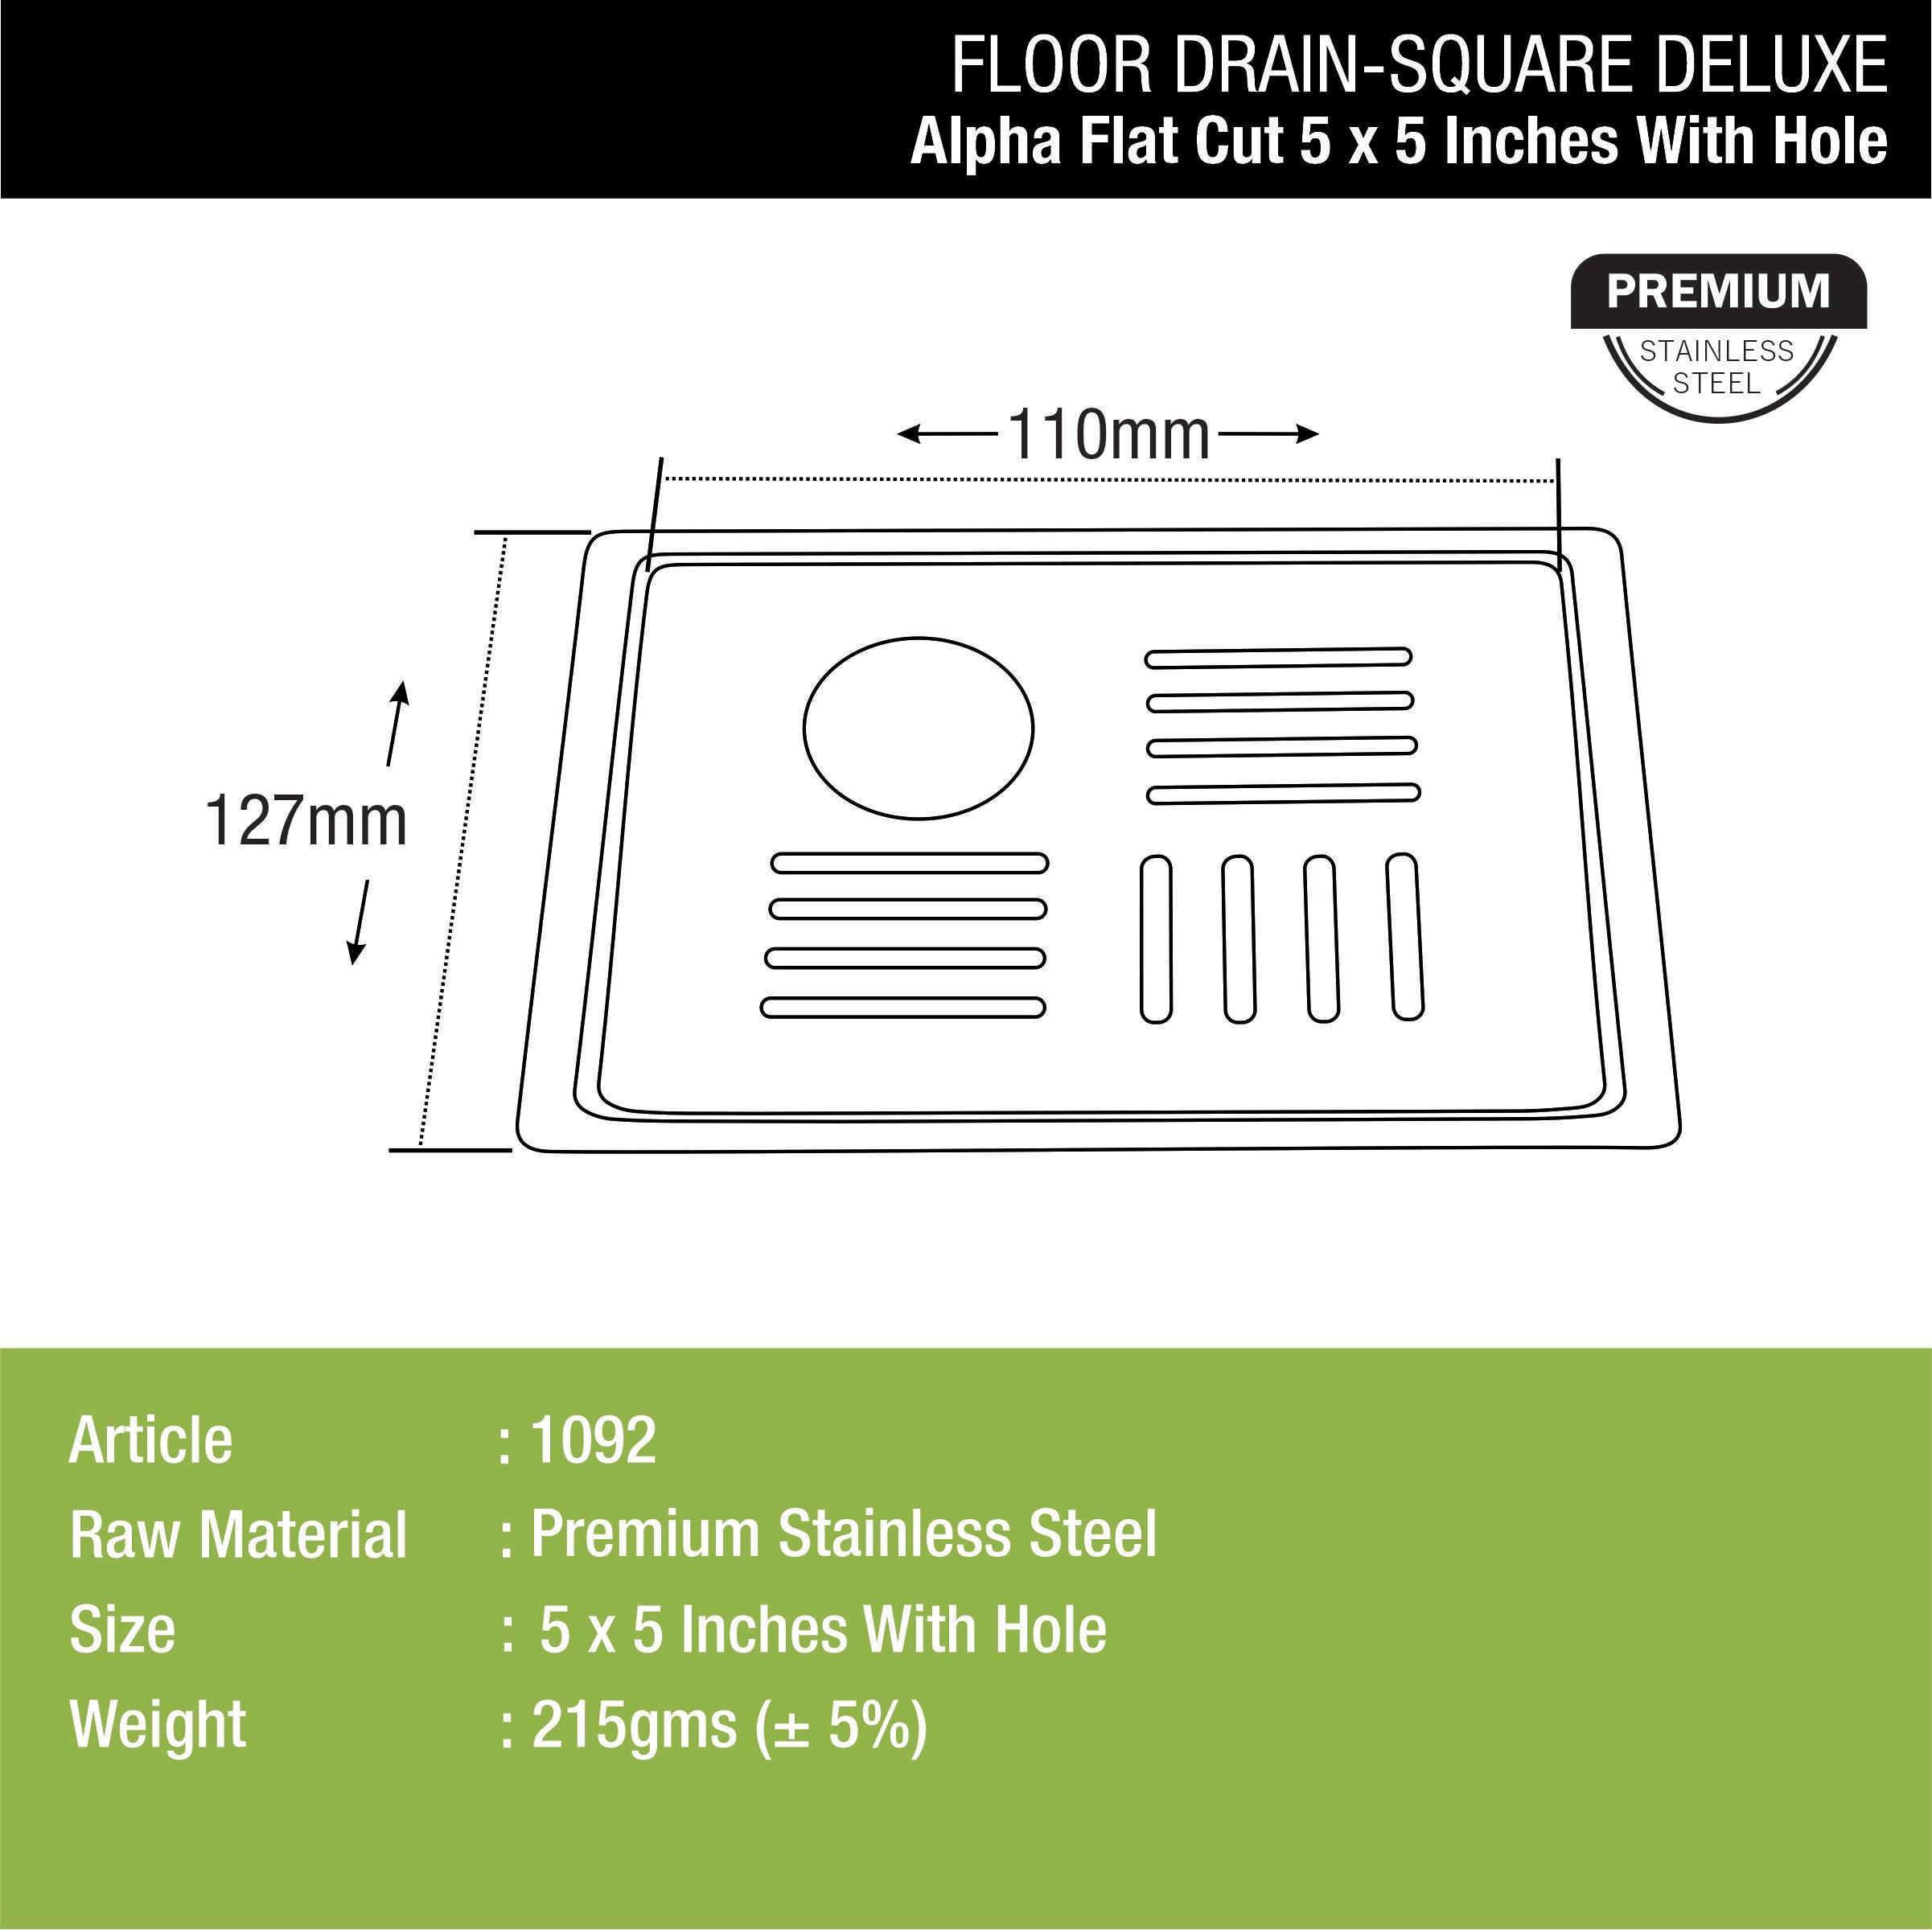 Alpha Deluxe Square Flat Cut Floor Drain (5 x 5 Inches) with Hole dimensions and sizes